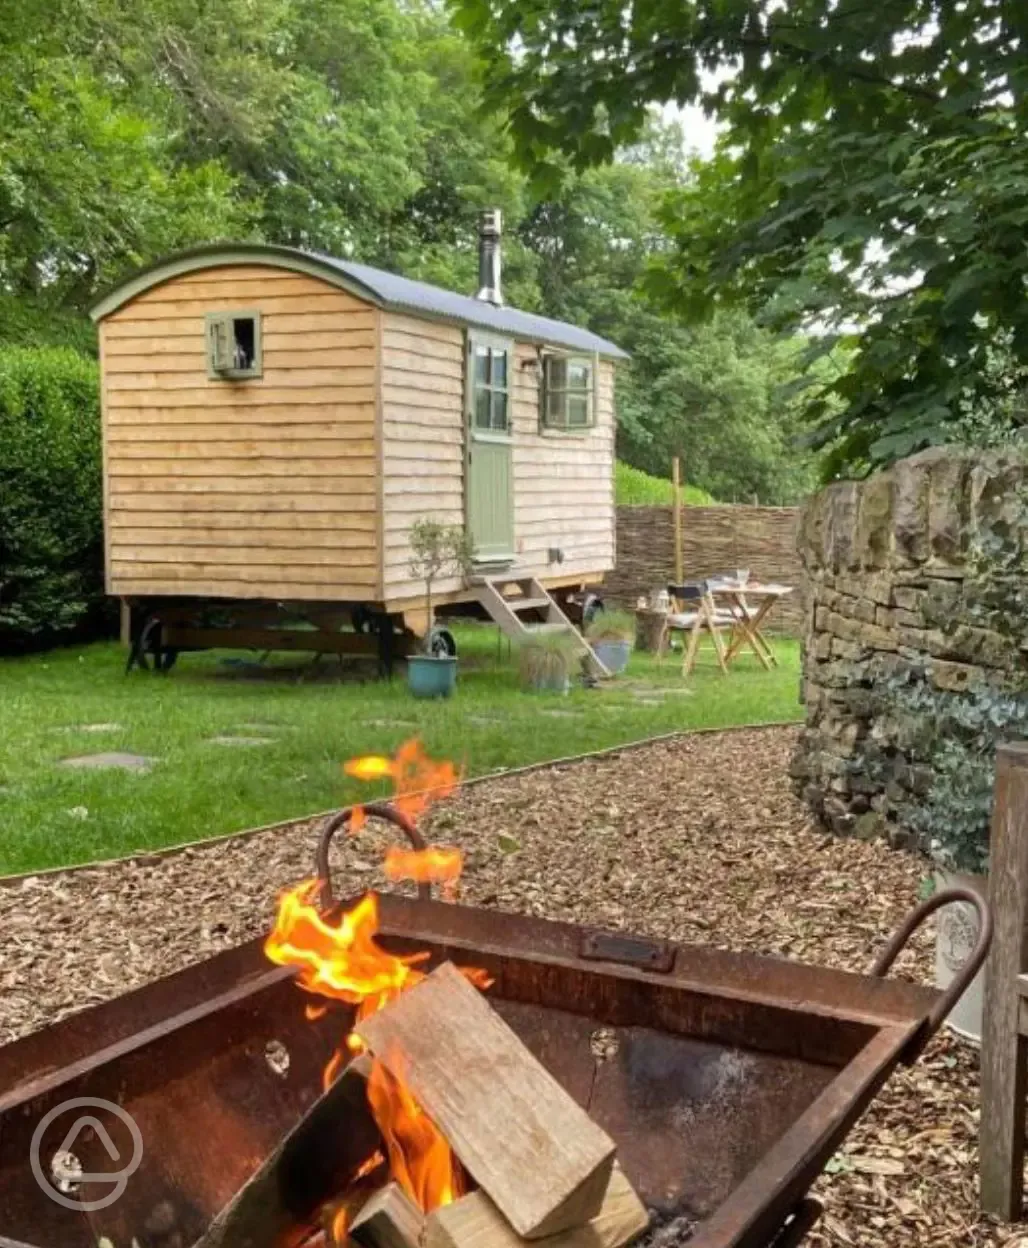 Shepherd's Hut with fire pit